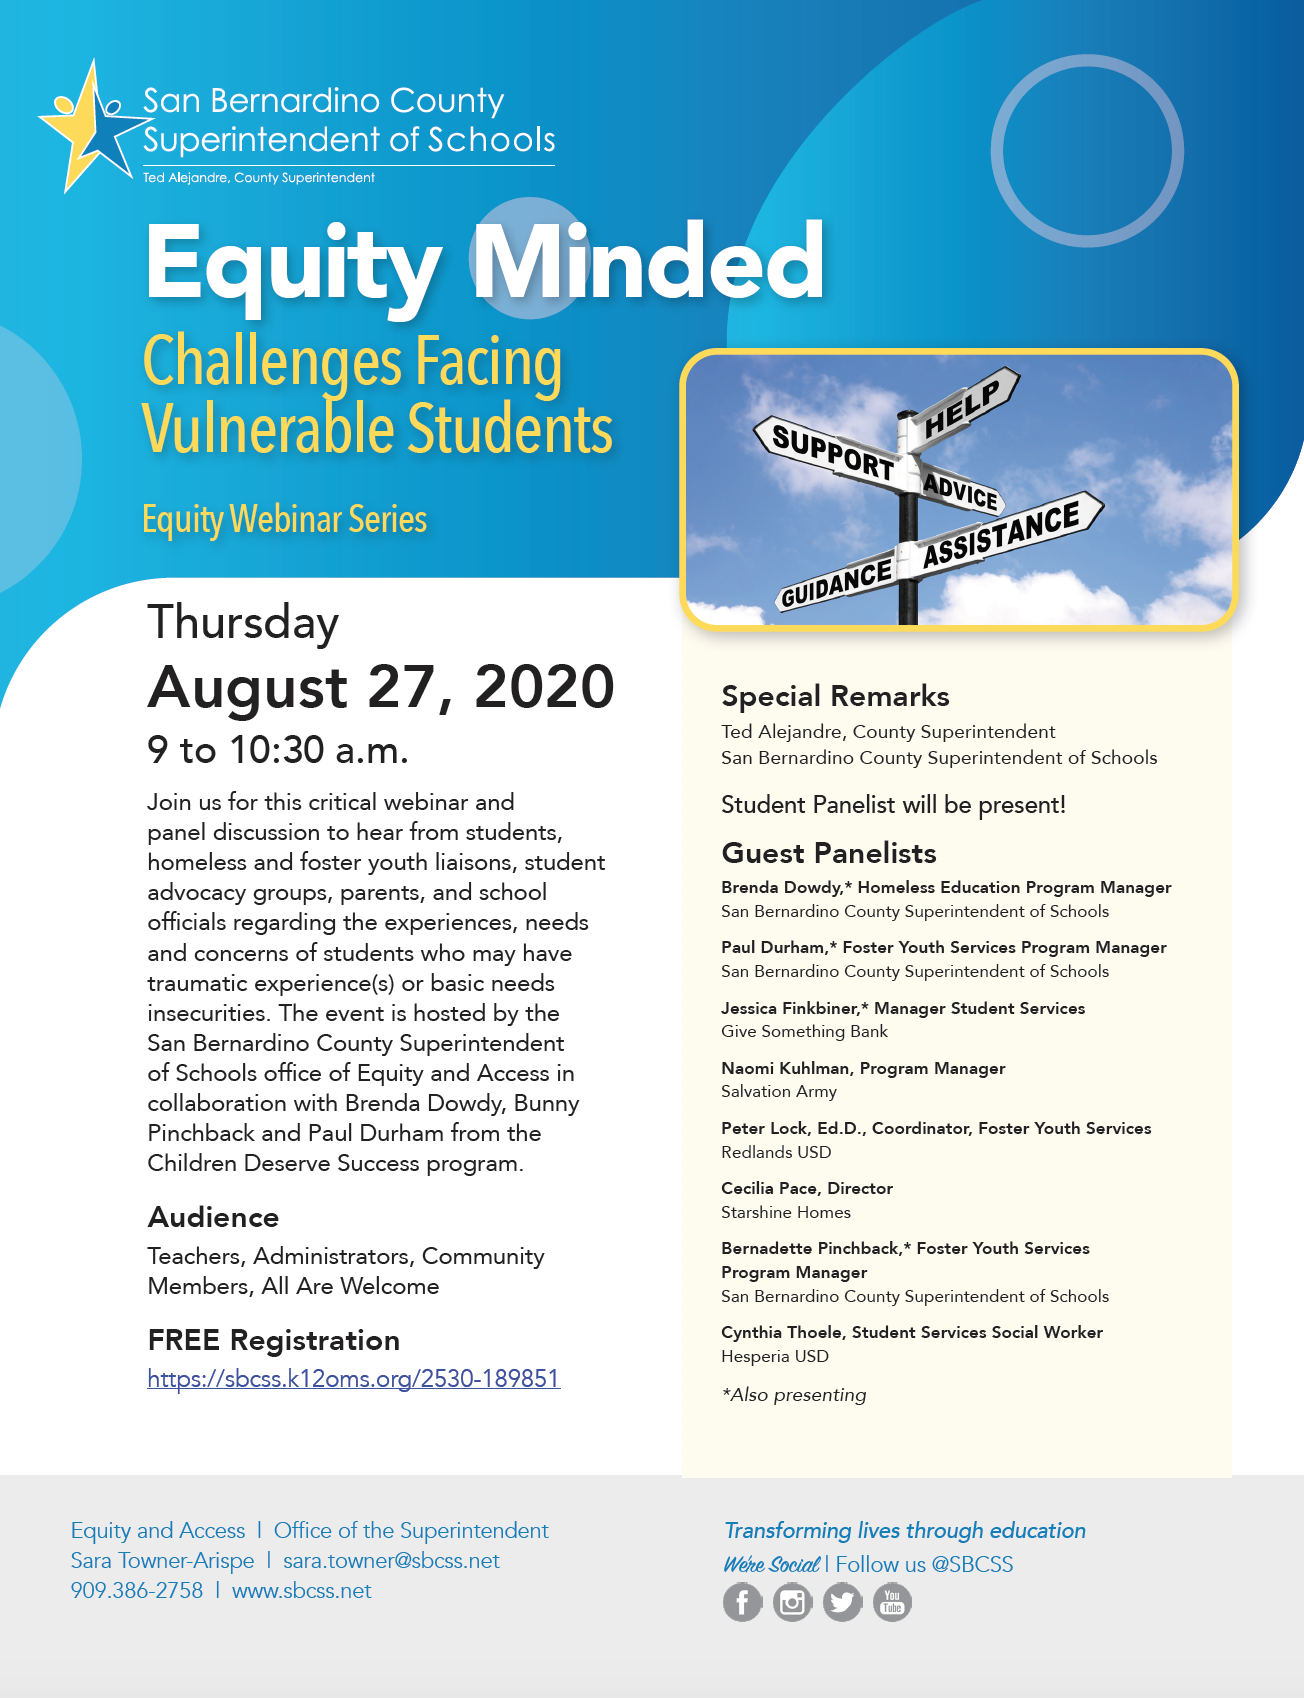 Equity Minded: Challenges Facing Vulnerable Students